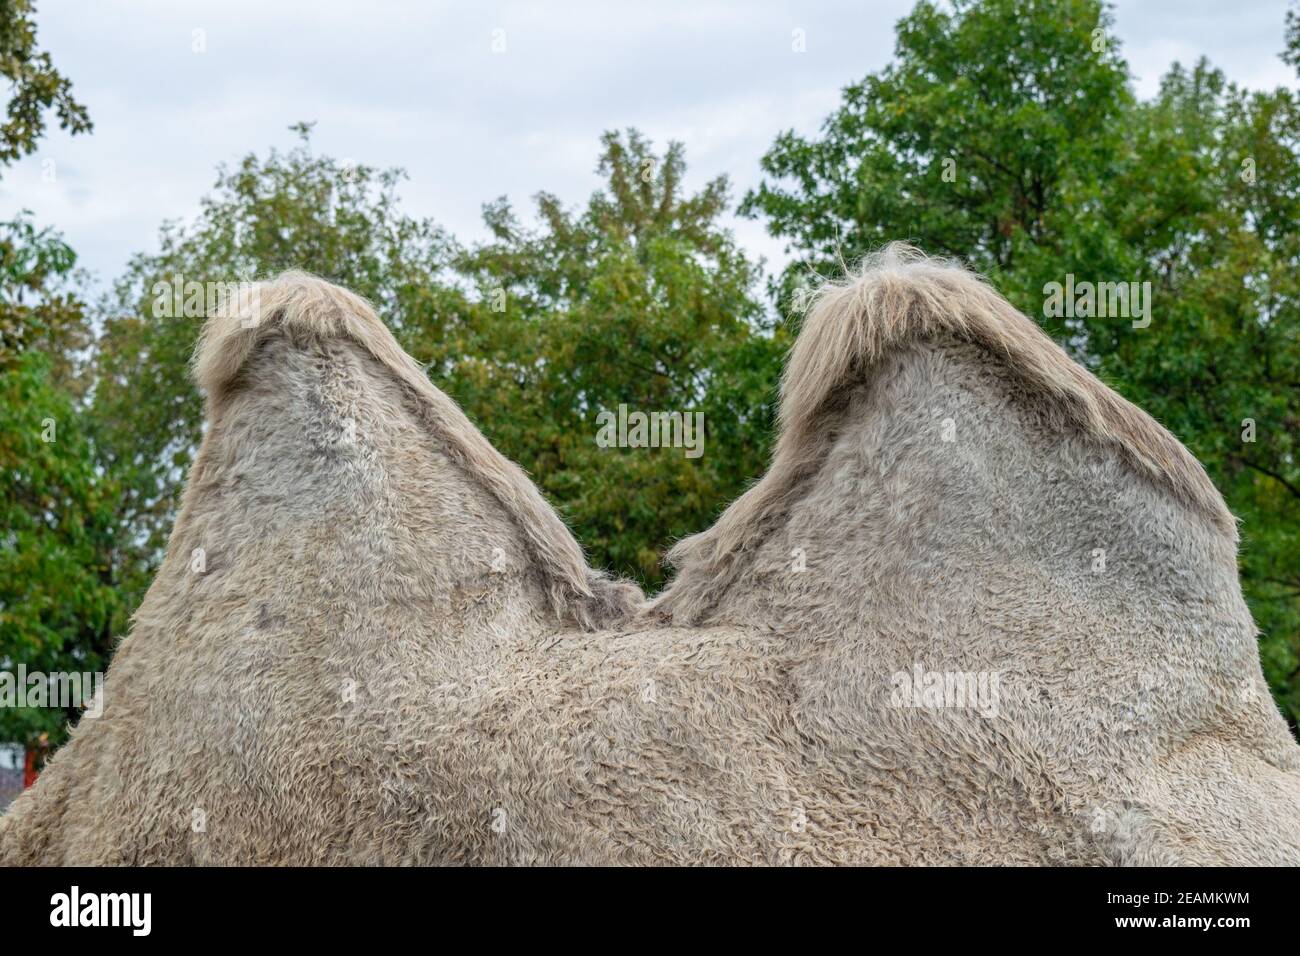 A two humped camel in the city park. Camel walking in the park Stock Photo